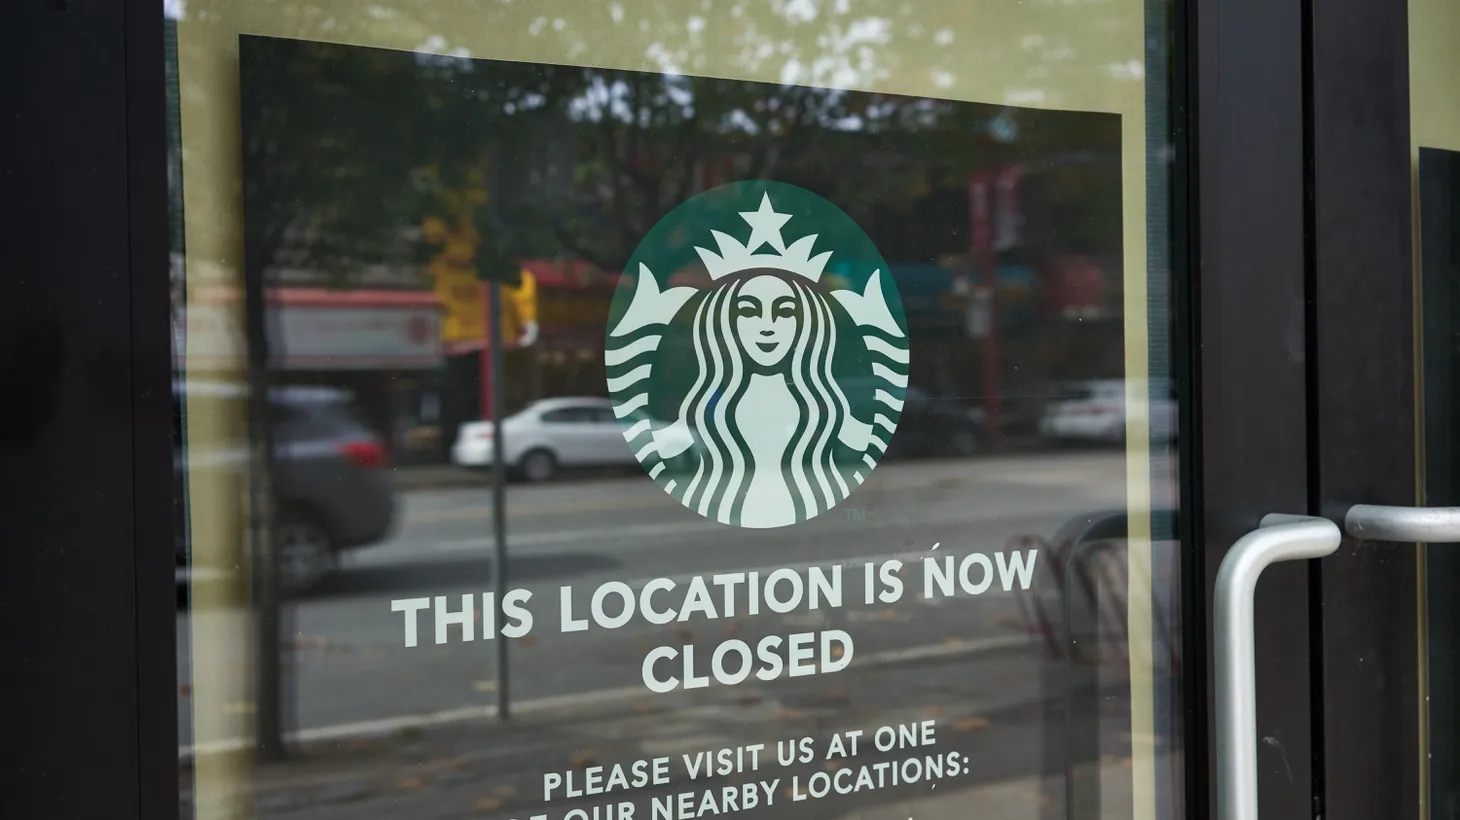 “This location is now closed,” a sign says on the door of a Starbucks.